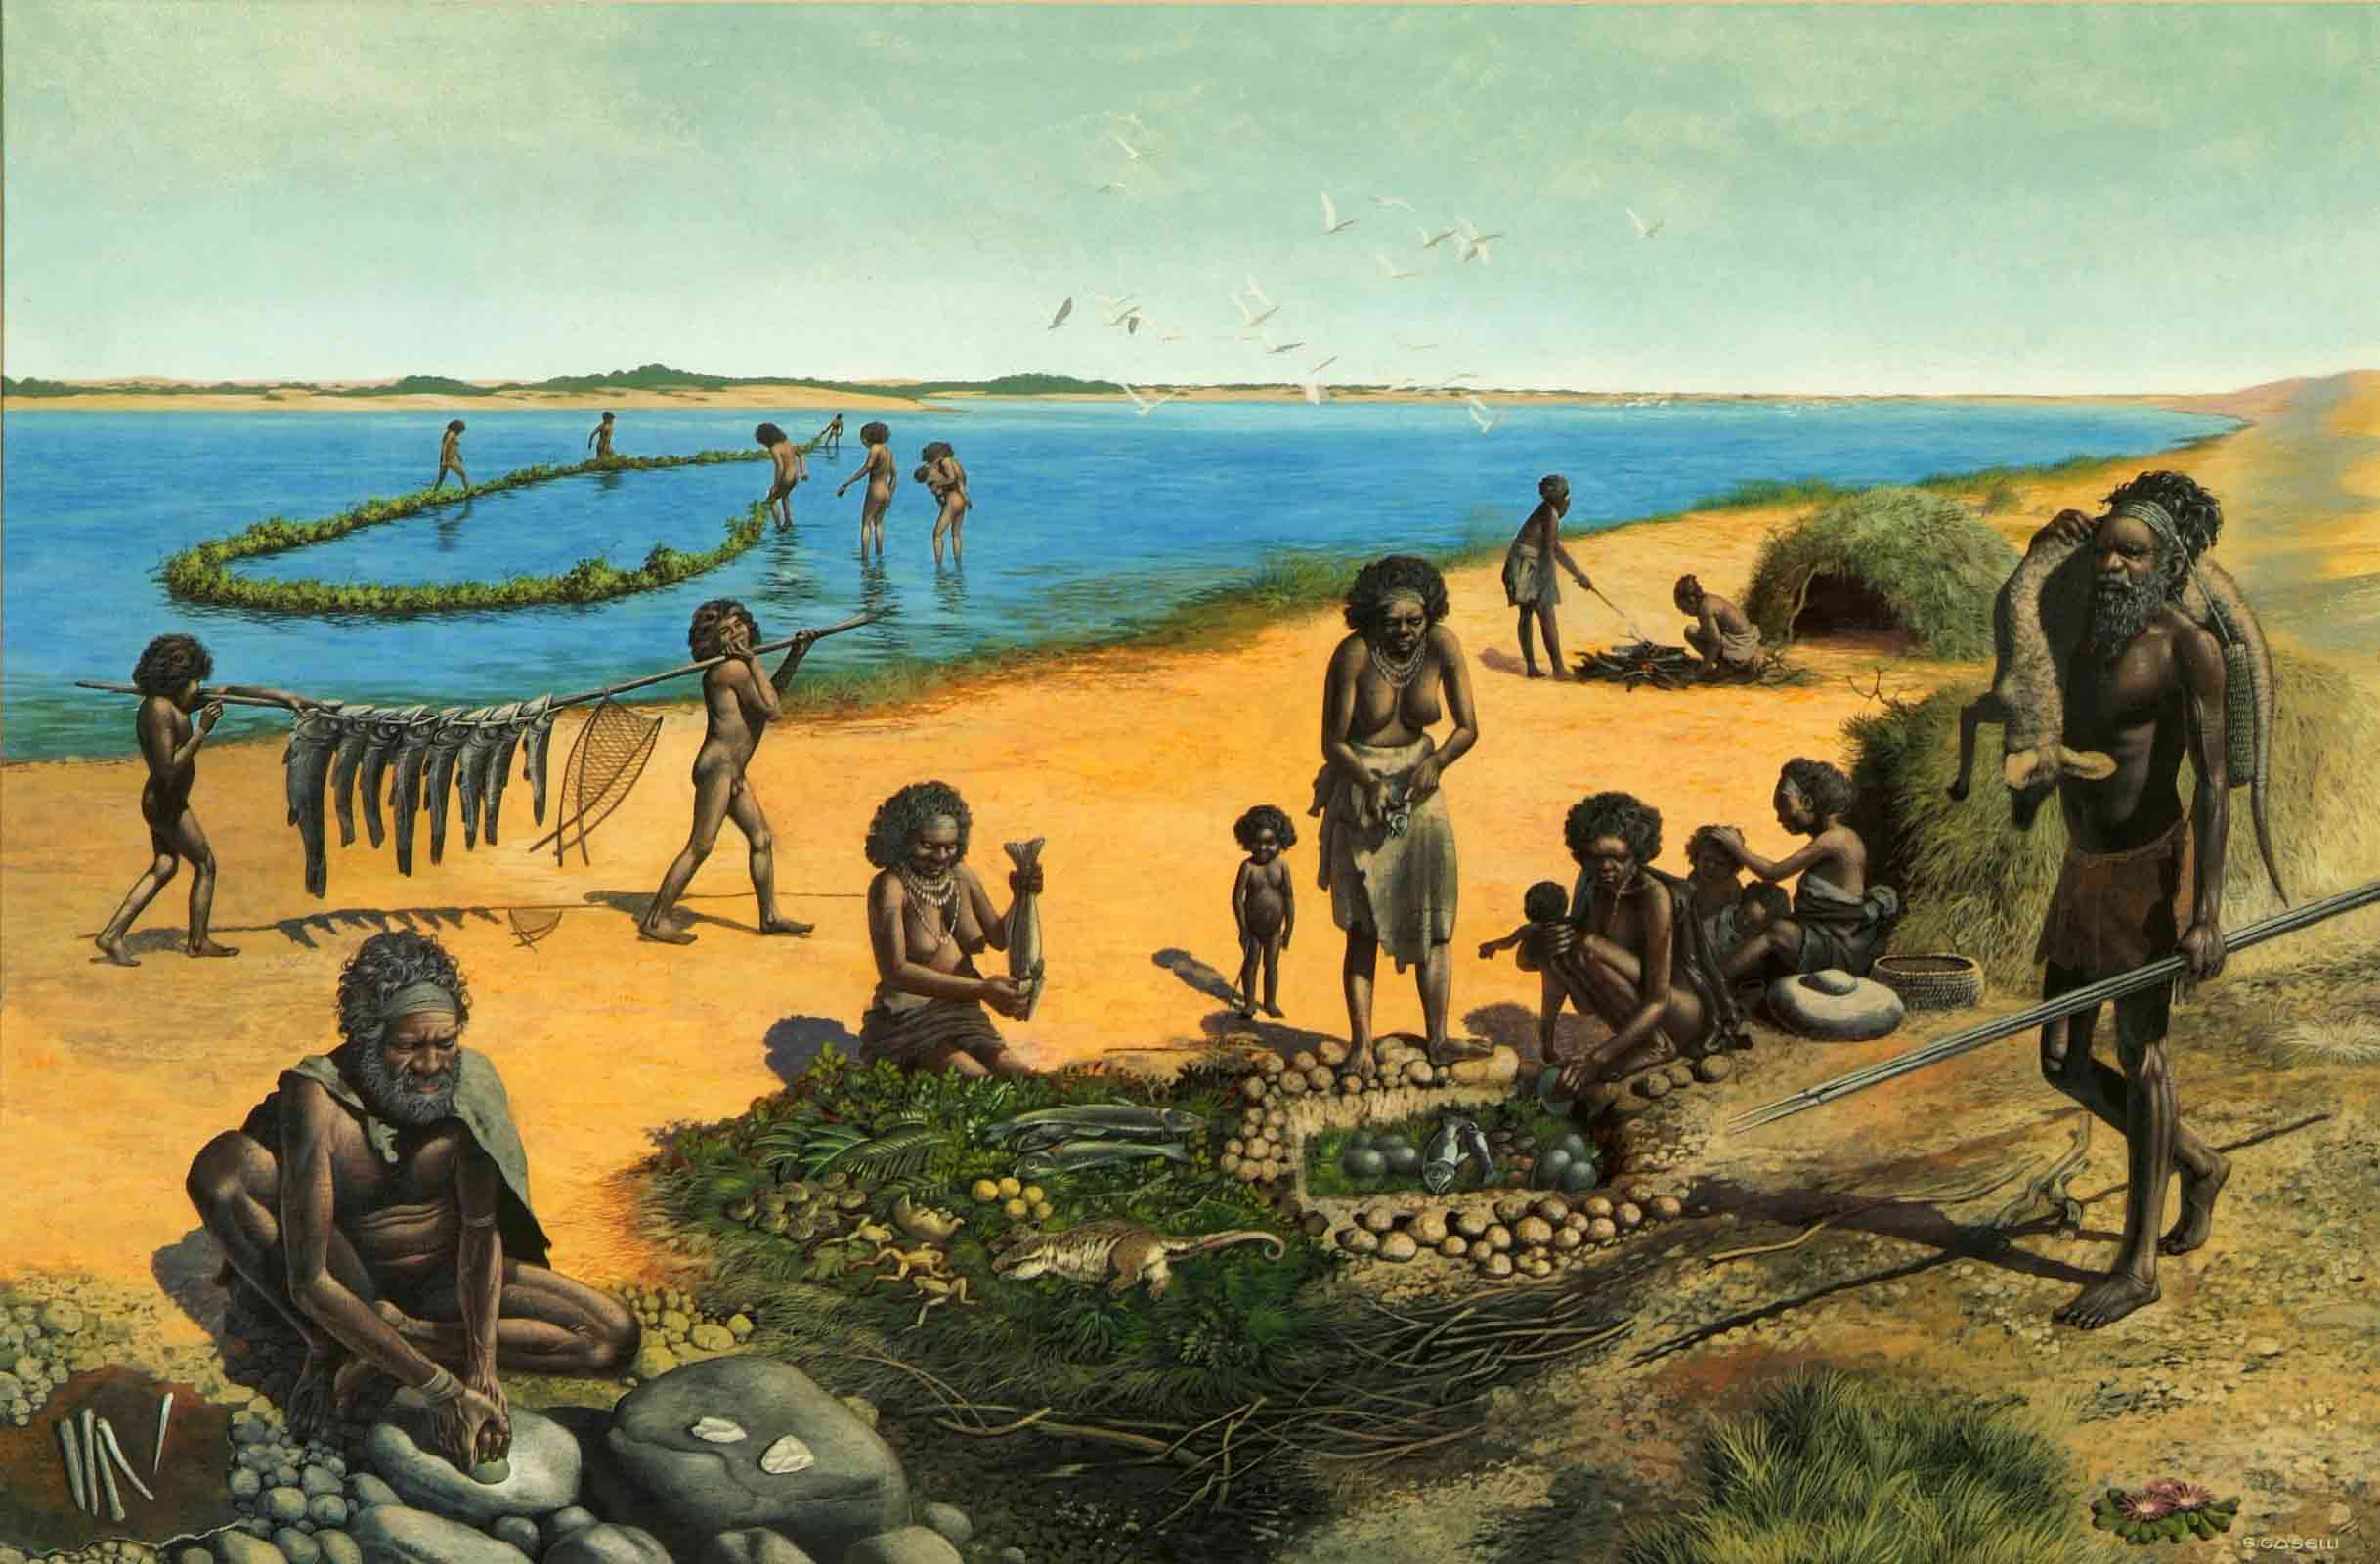 Lake Mungo People, 1974, by artist and archaeologist Giovanni Caselli